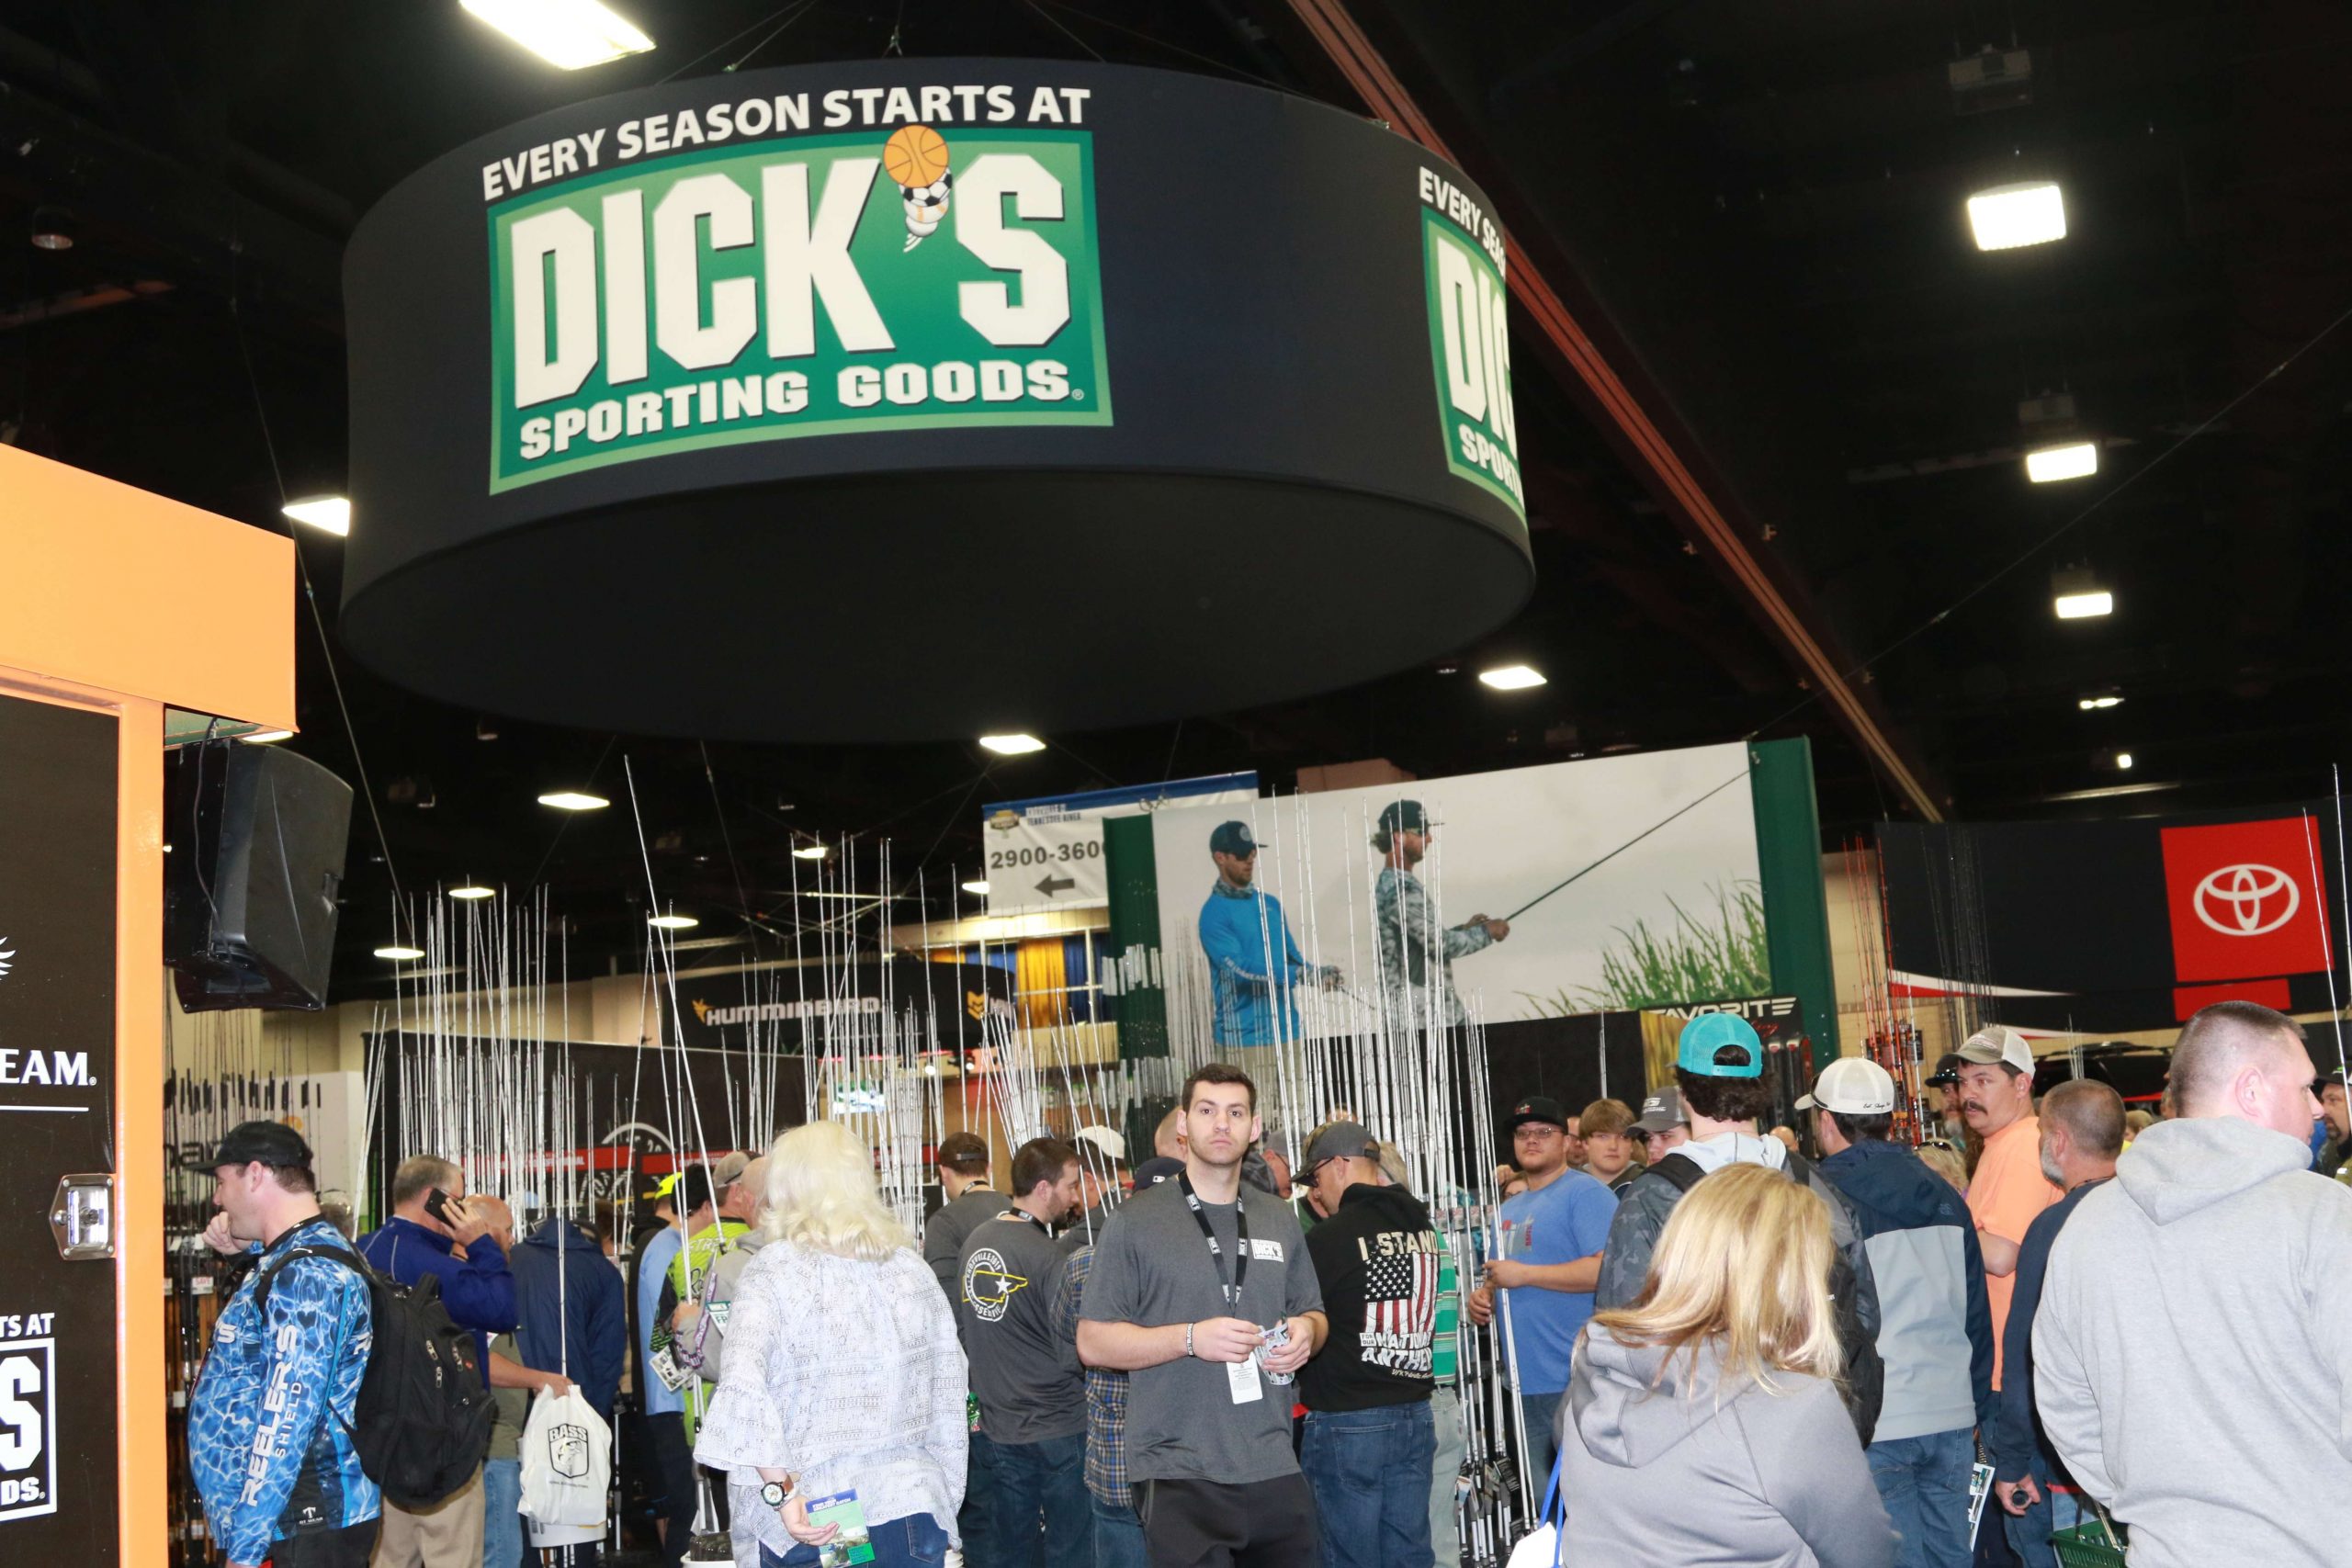 The DICK'S Sporting Goods booth was packed from start to finish.